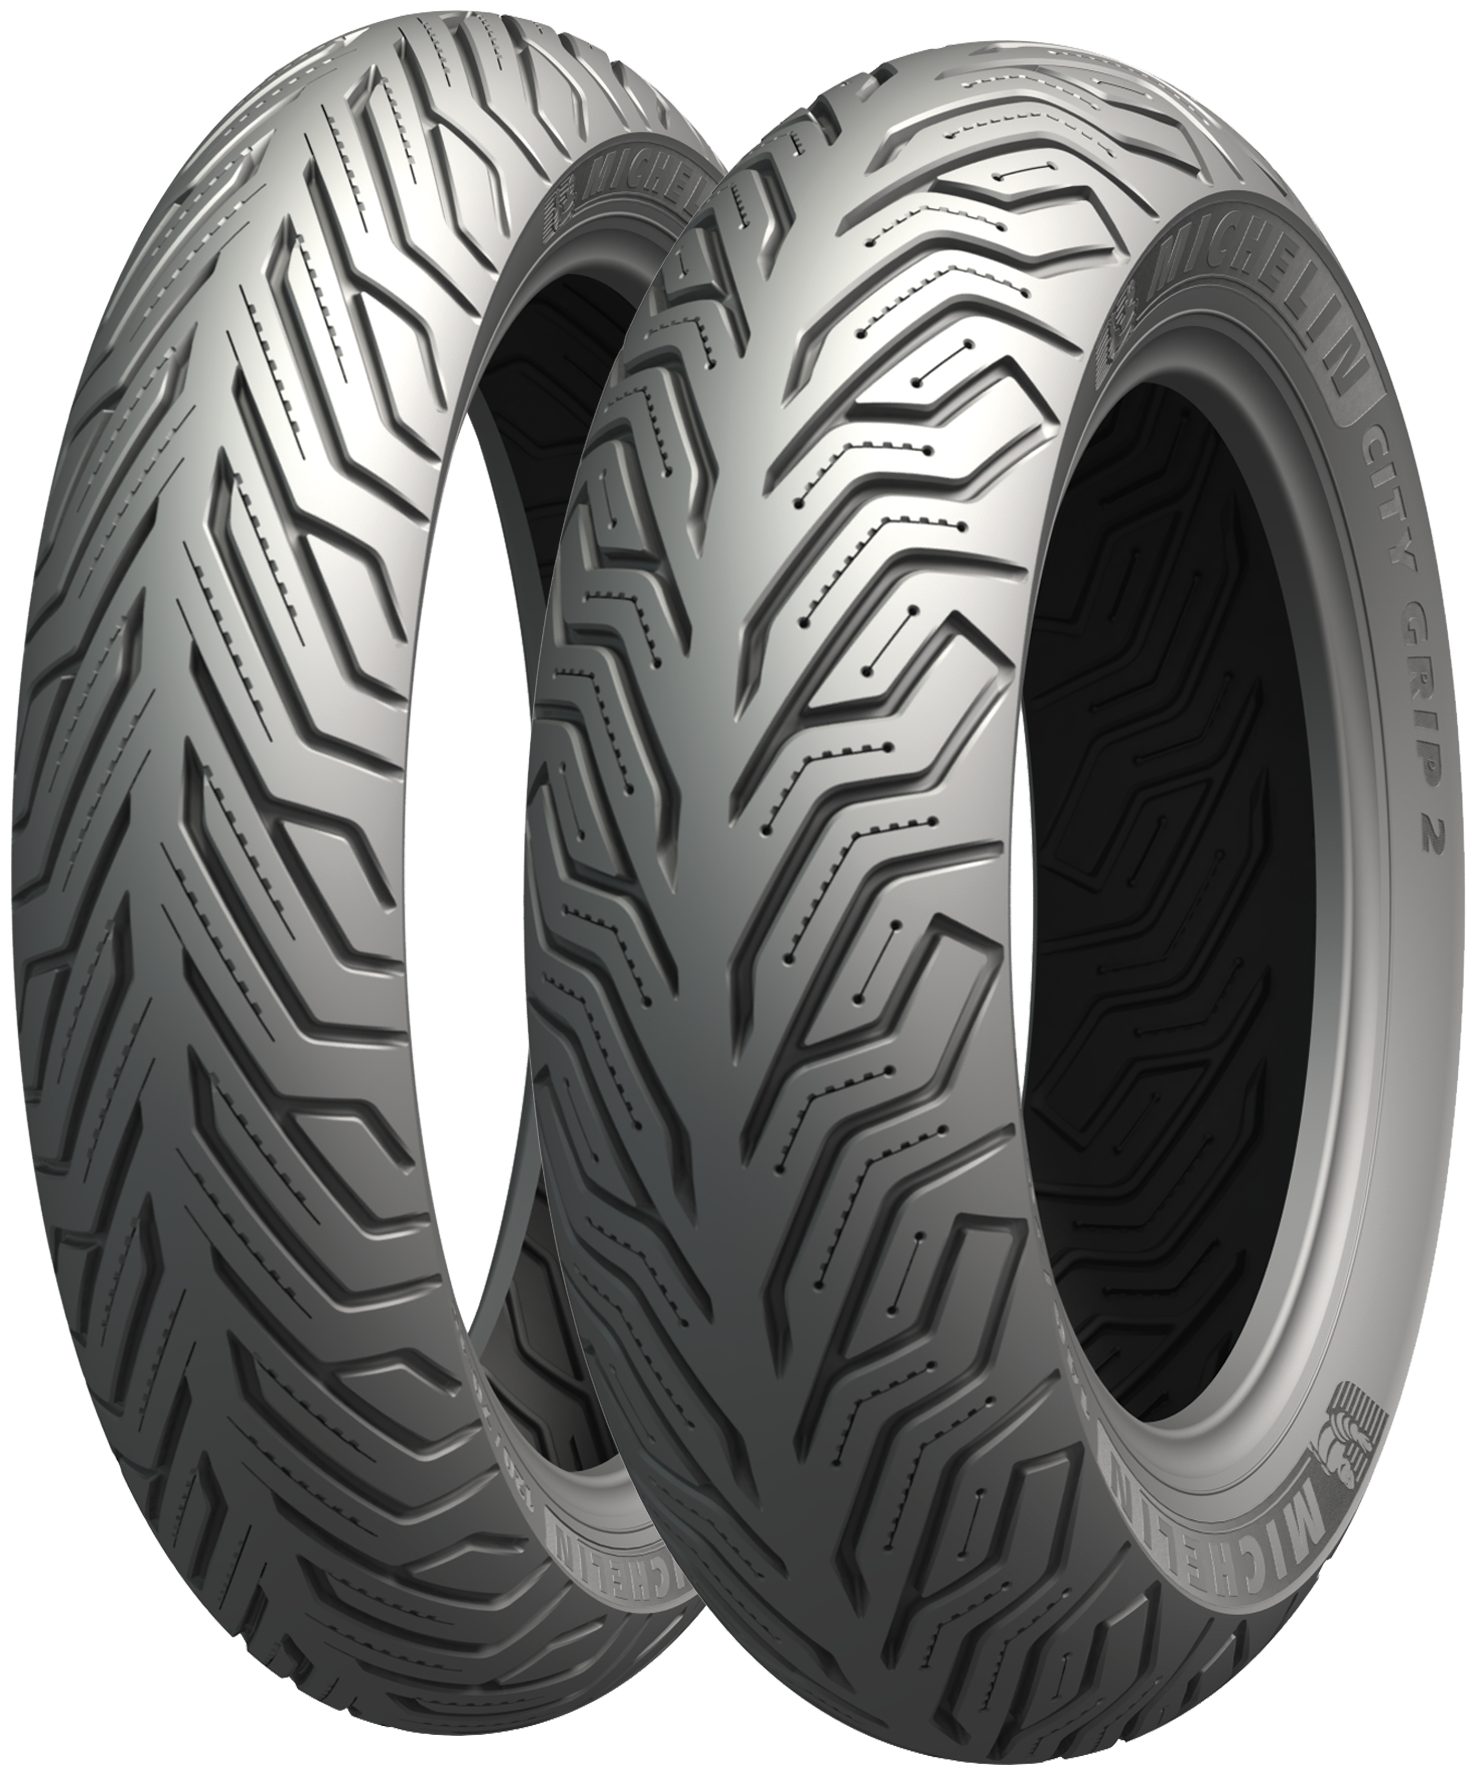 Мотошины Michelin City Grip 2 90/80 -16 51S TL Front/Rear REINF